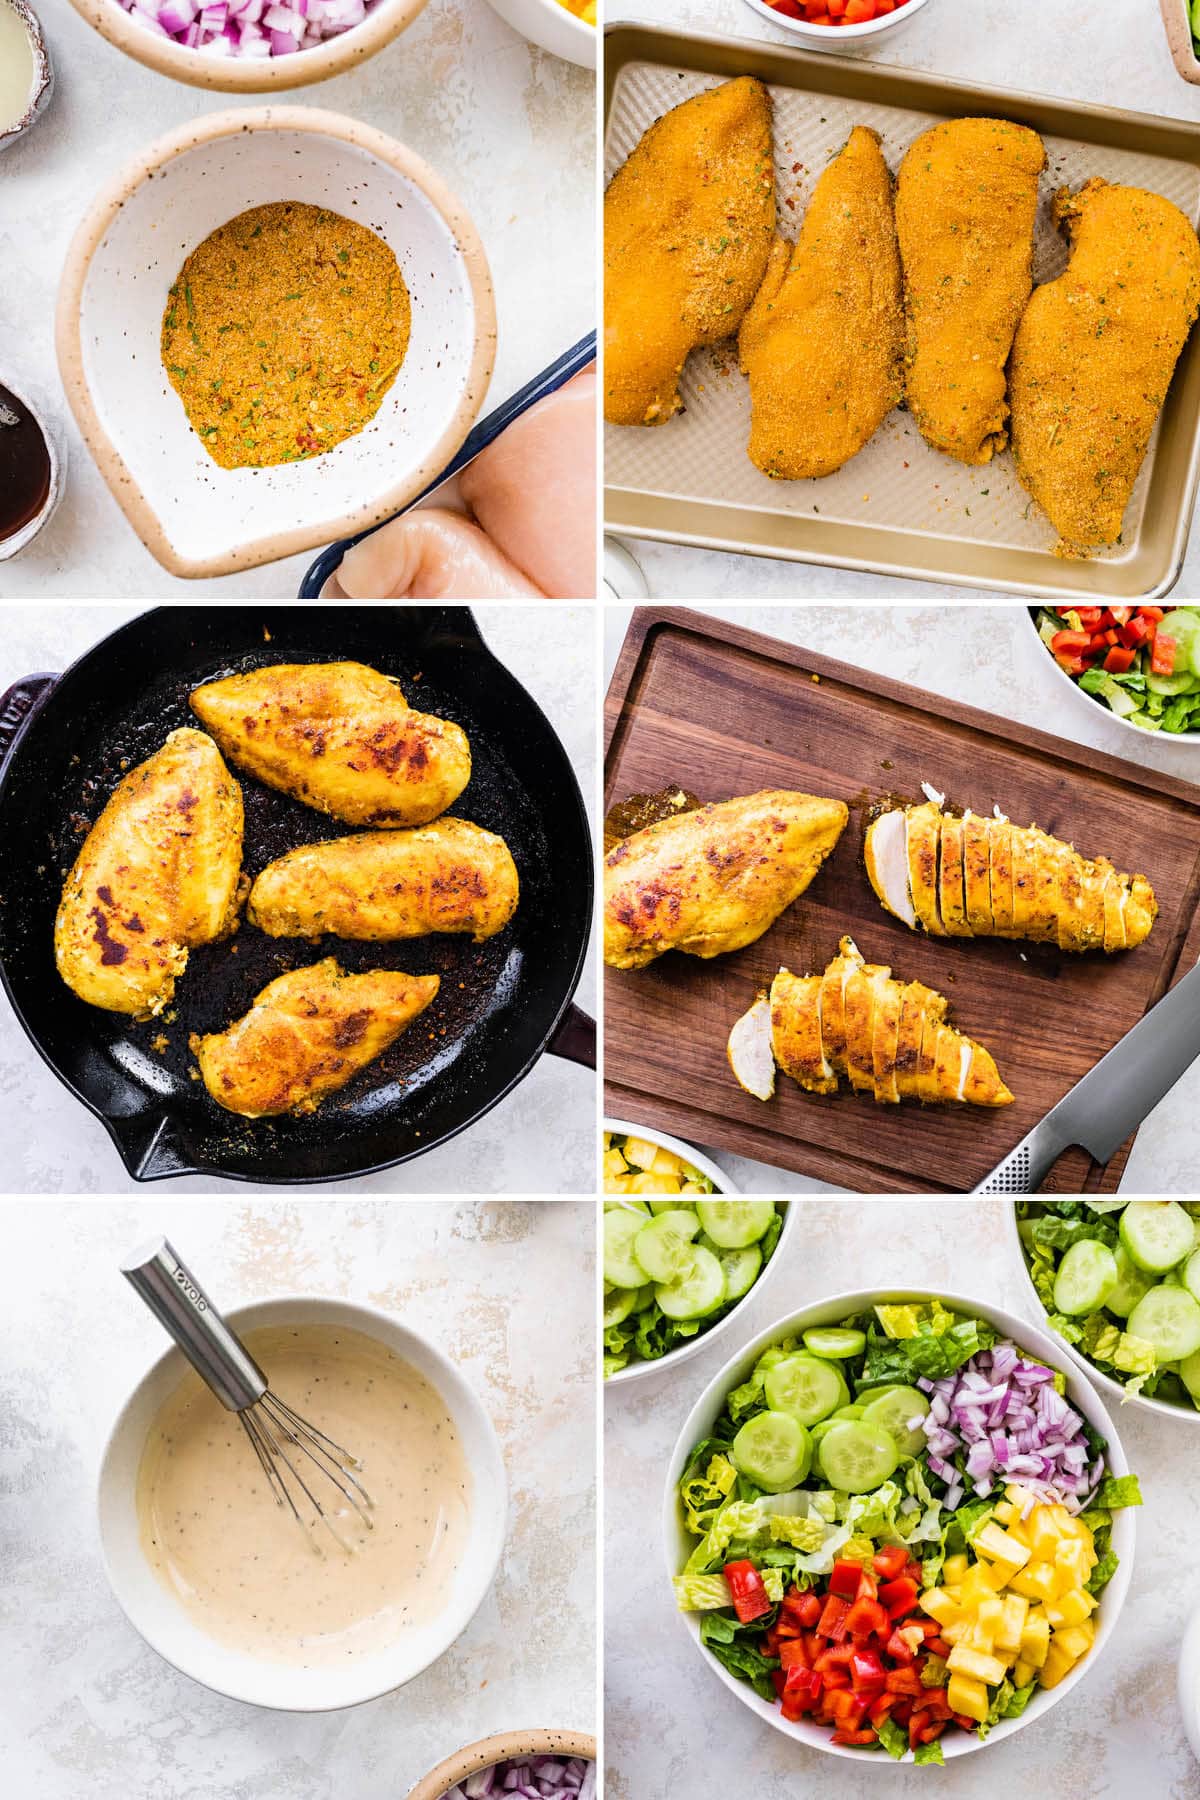 Collage of six photos showing the steps to make Thai Curry Chicken Salad: cooking the curry-rubbed chicken, making a creamy dressing and assembling the salads.